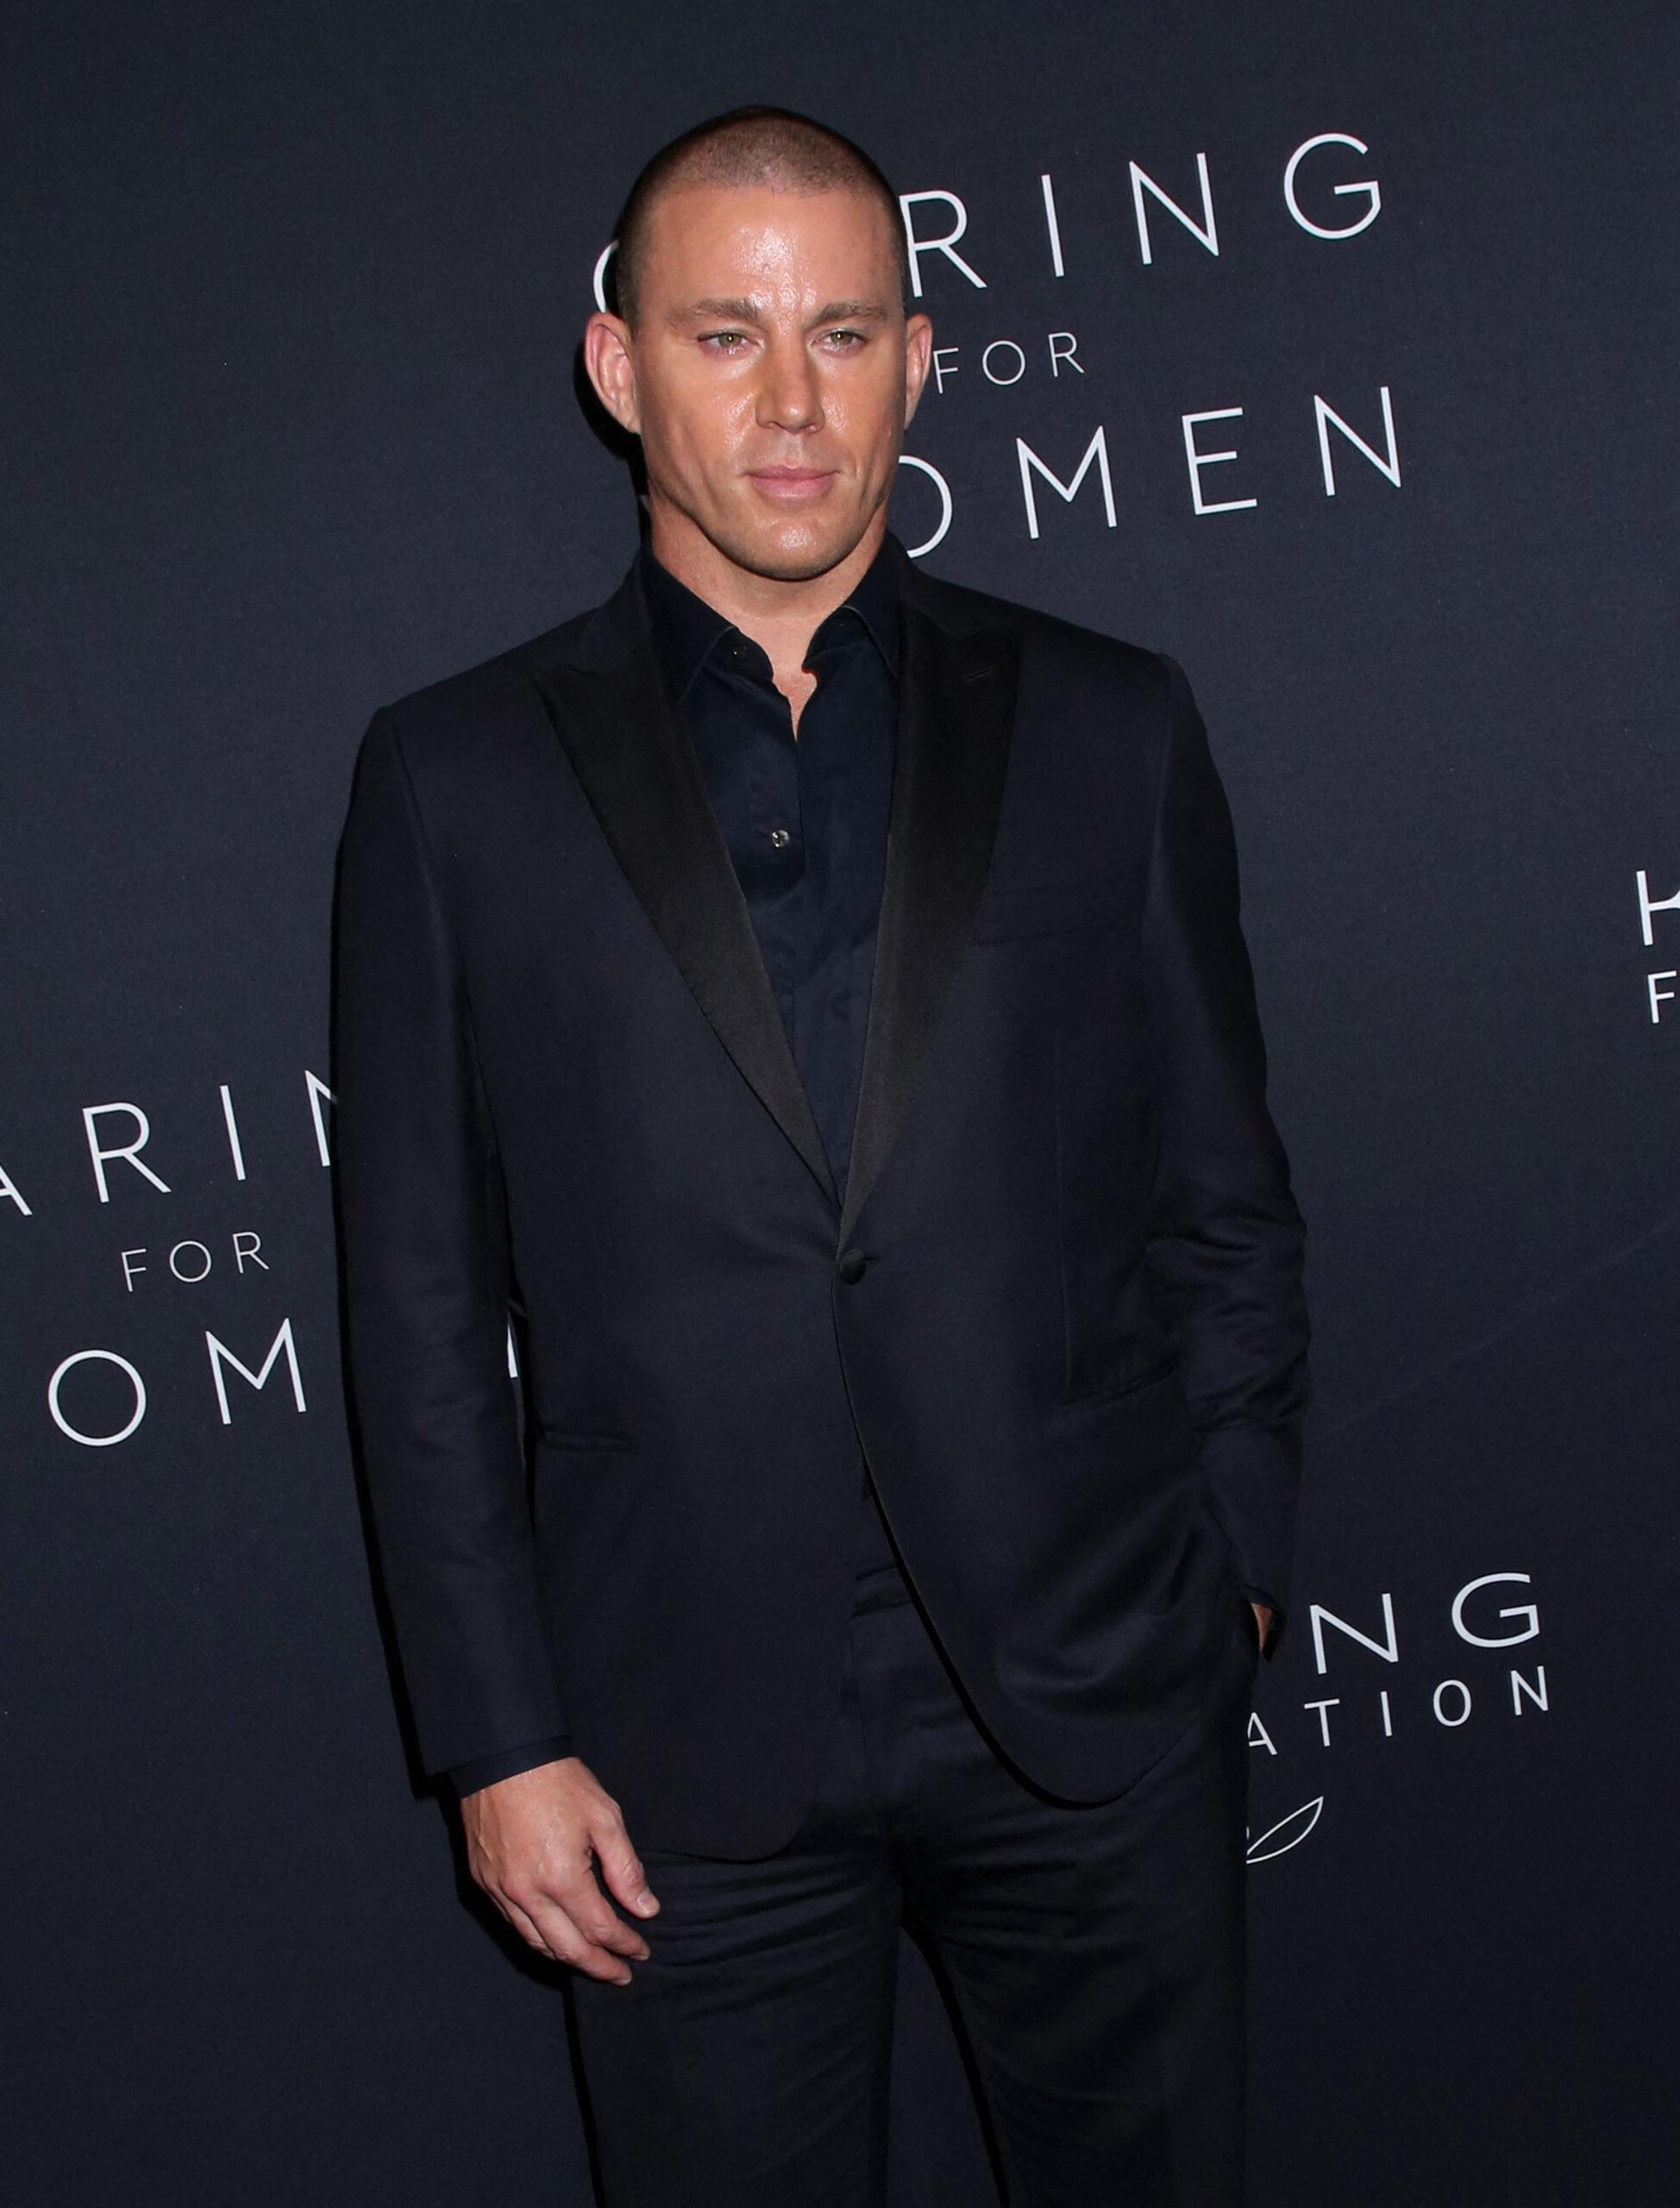 Channing Tatum attends Kering Foundation's 2nd Annual Caring for Women dinner